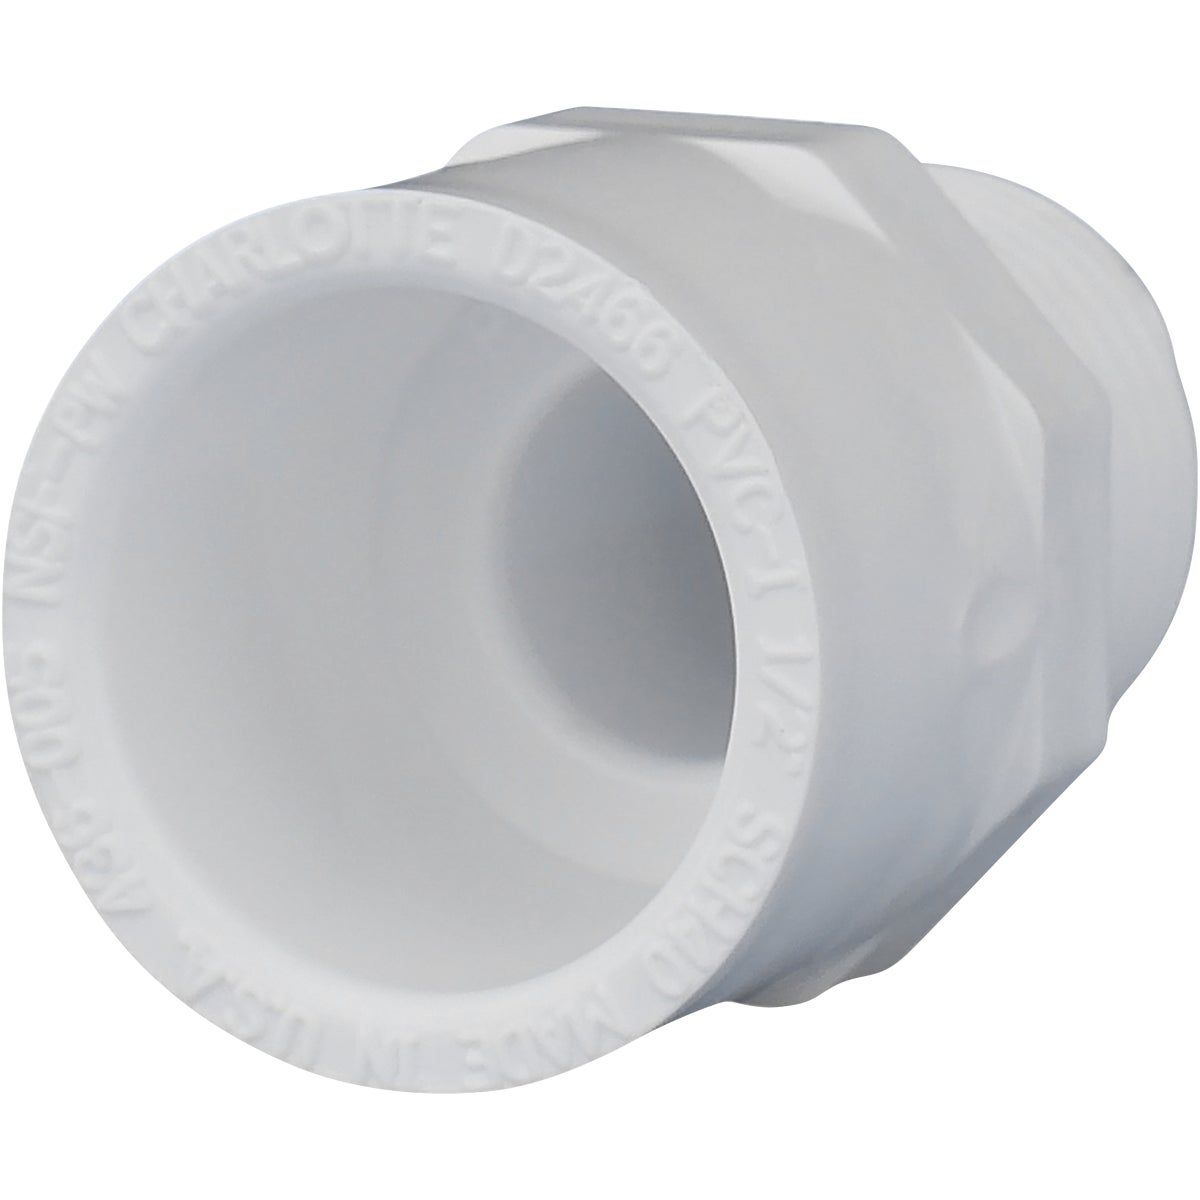 Item 428950, For I.P.S. Schedule 40 cold water pressure pipe. White.